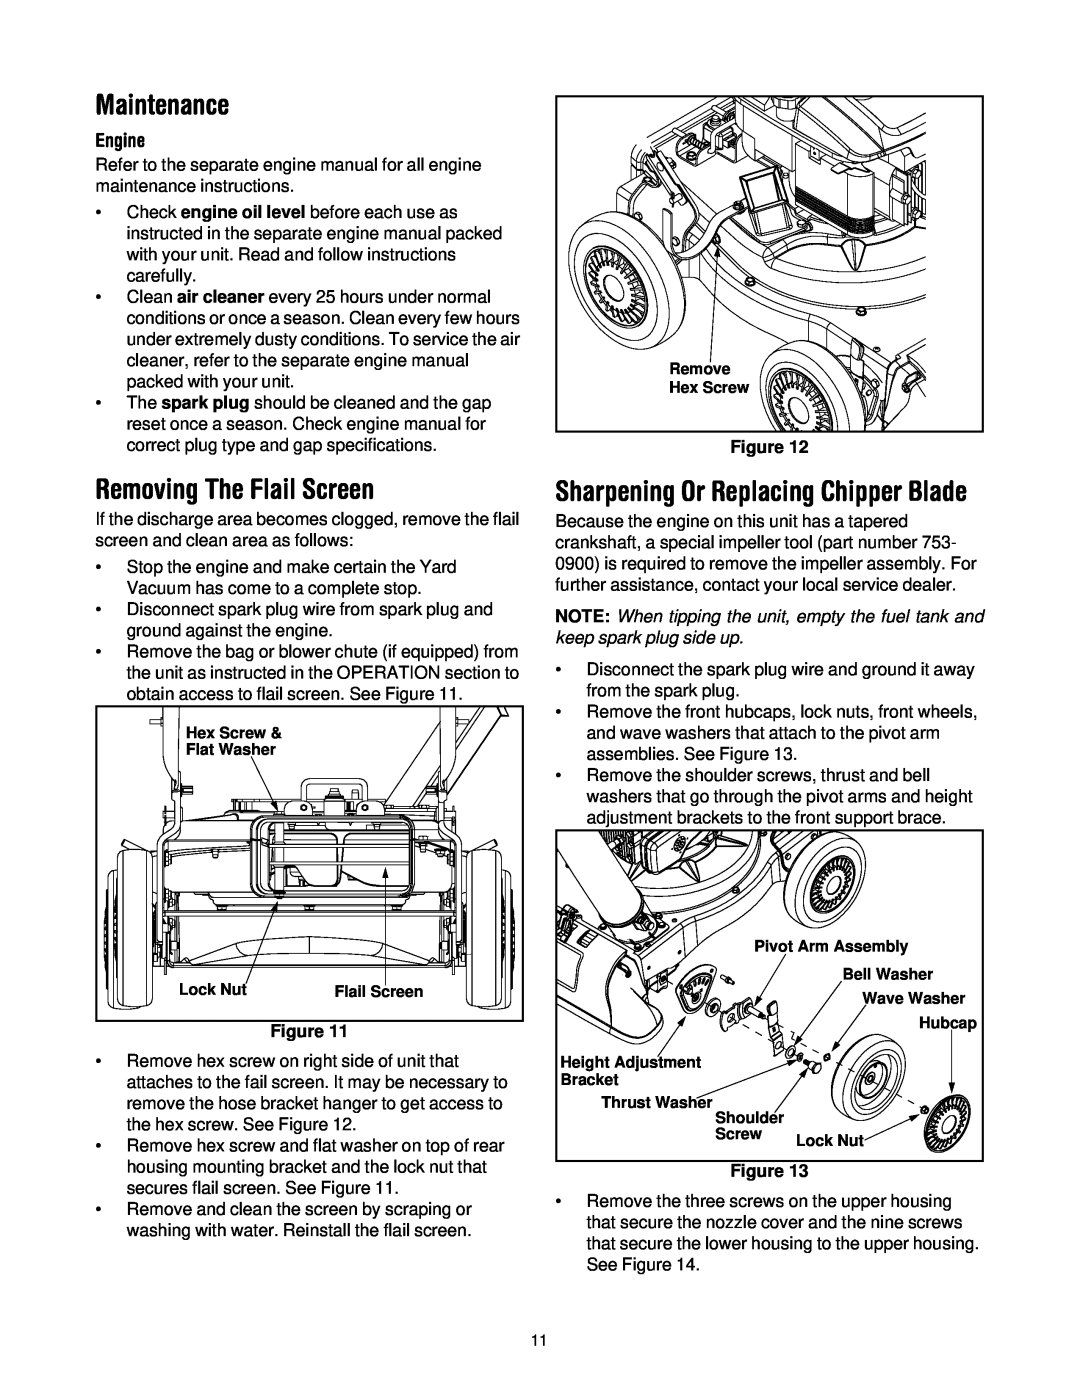 Troy-Bilt 24B-060F063 manual Maintenance, Removing The Flail Screen, Sharpening Or Replacing Chipper Blade, Engine, Figure 